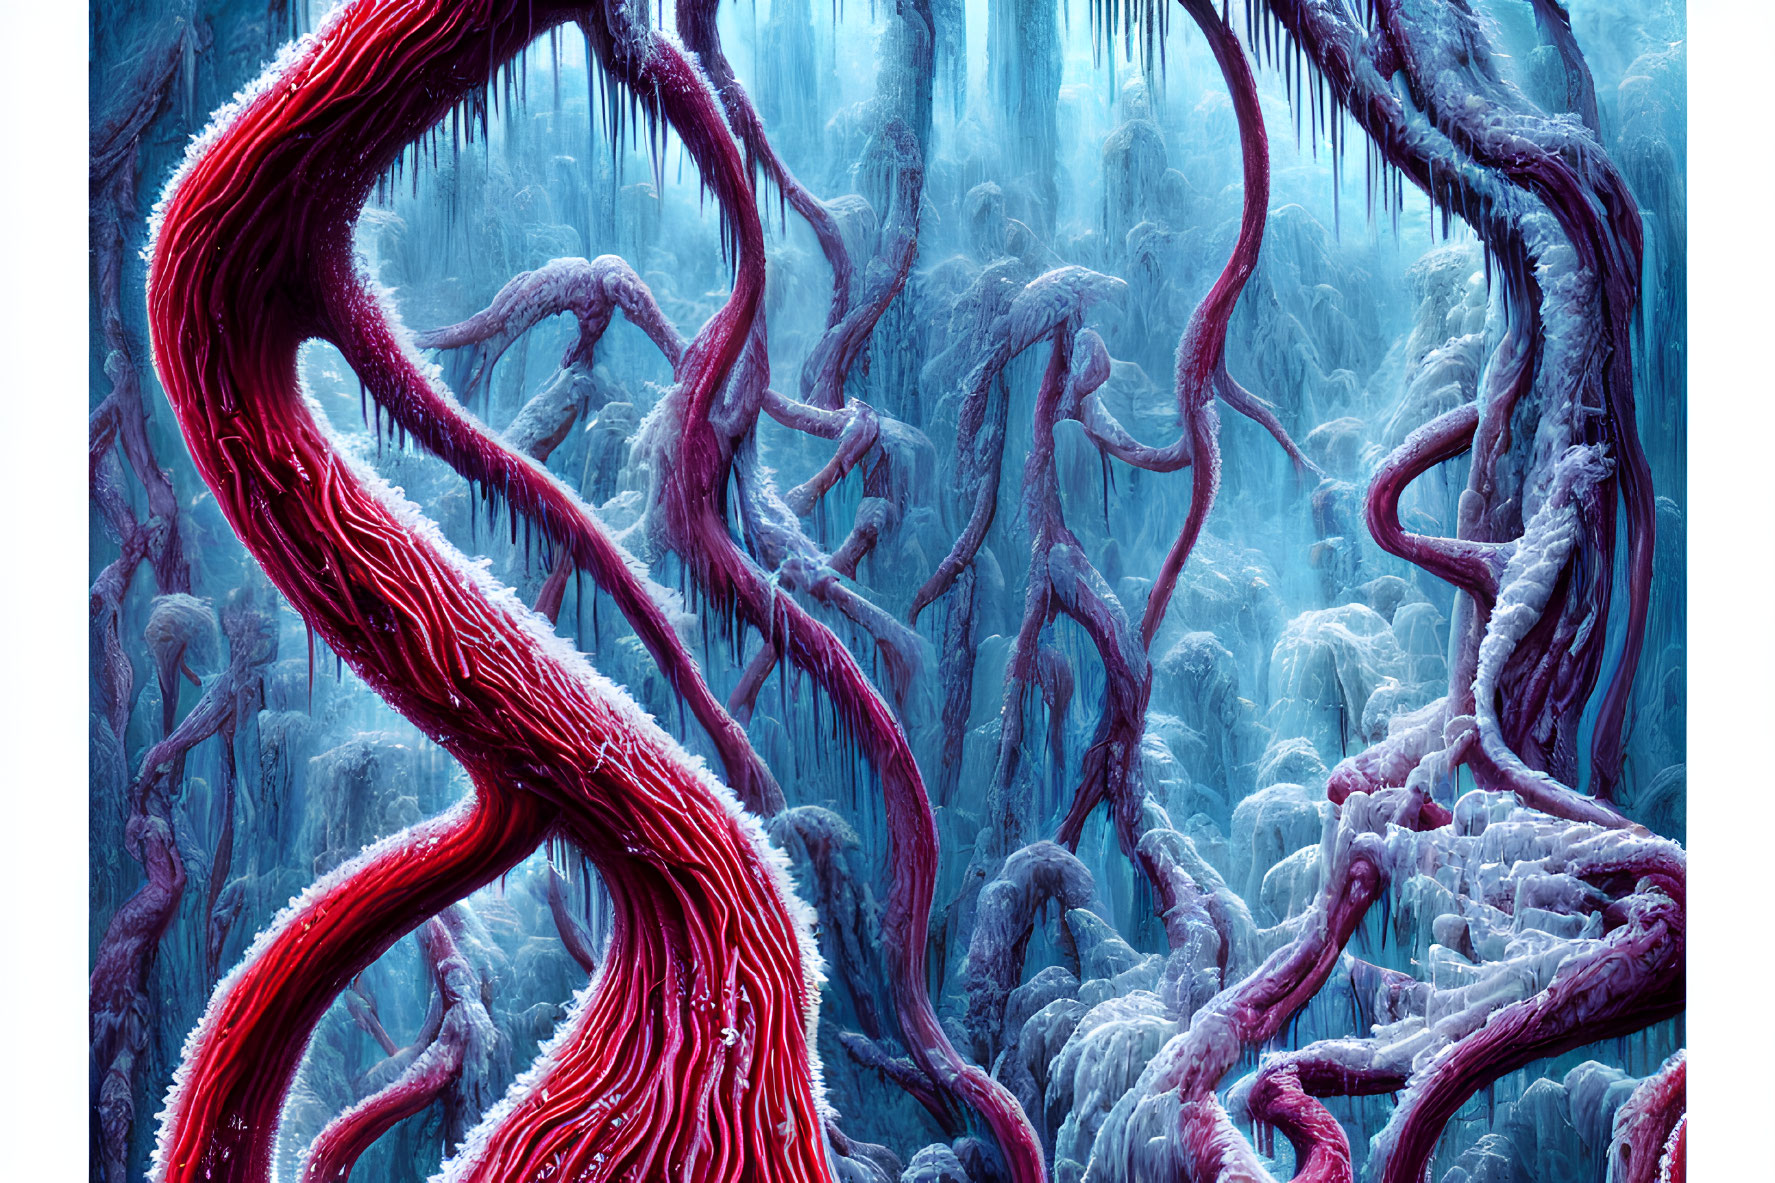 Fantastical forest with red vein-like trees in blue icy background